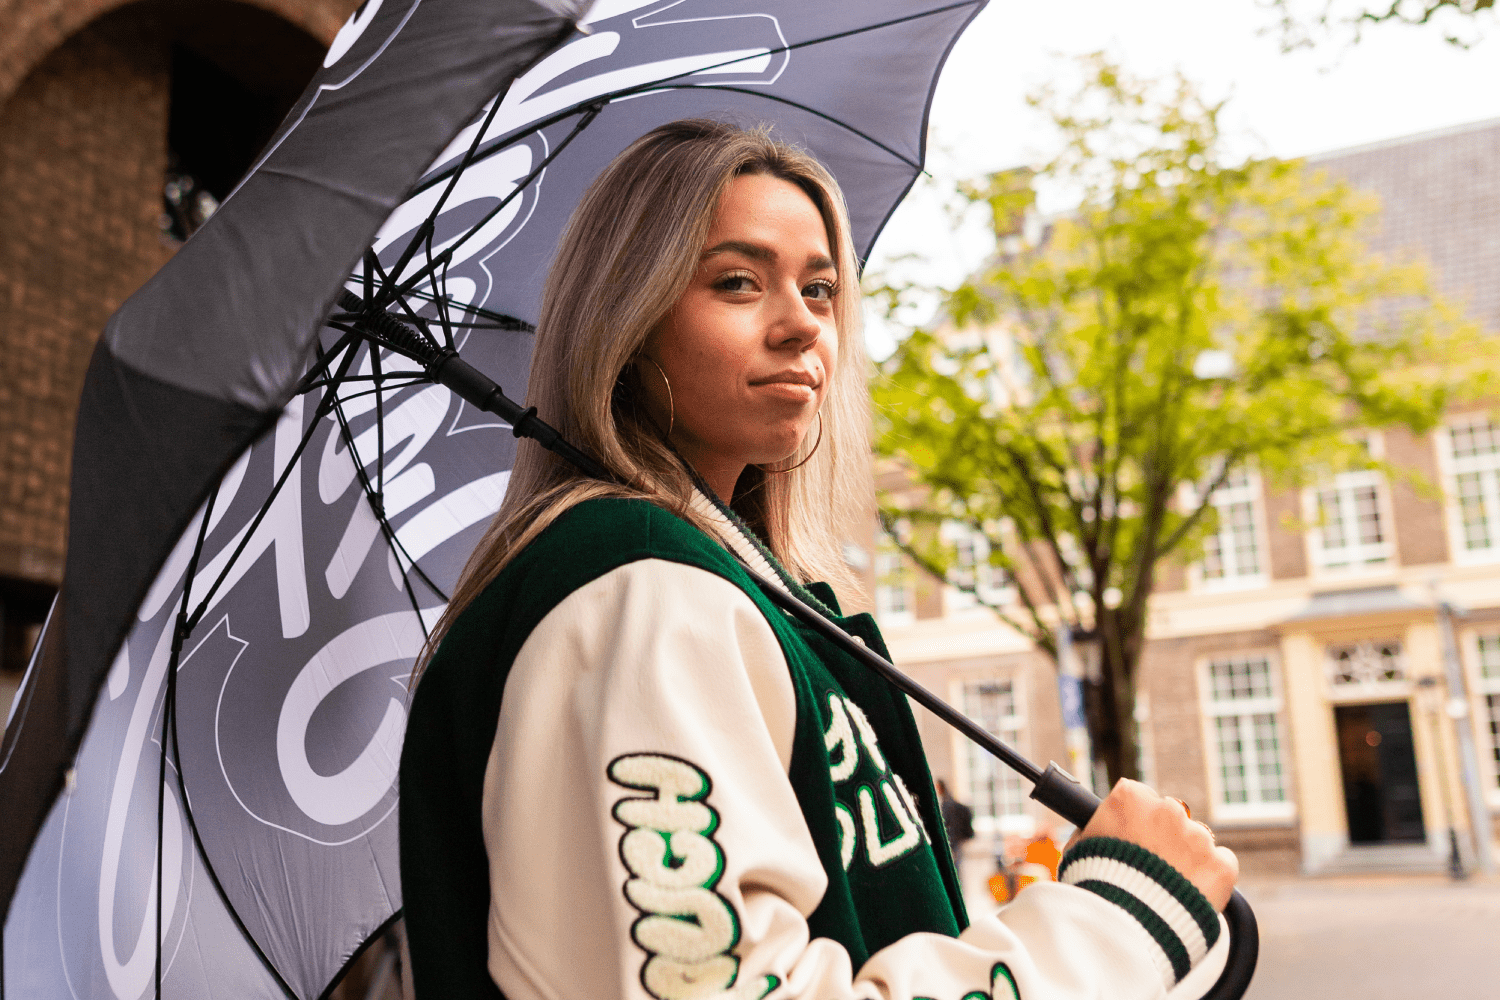 The exclusive Sneakerjagers umbrella is available for 24 hours